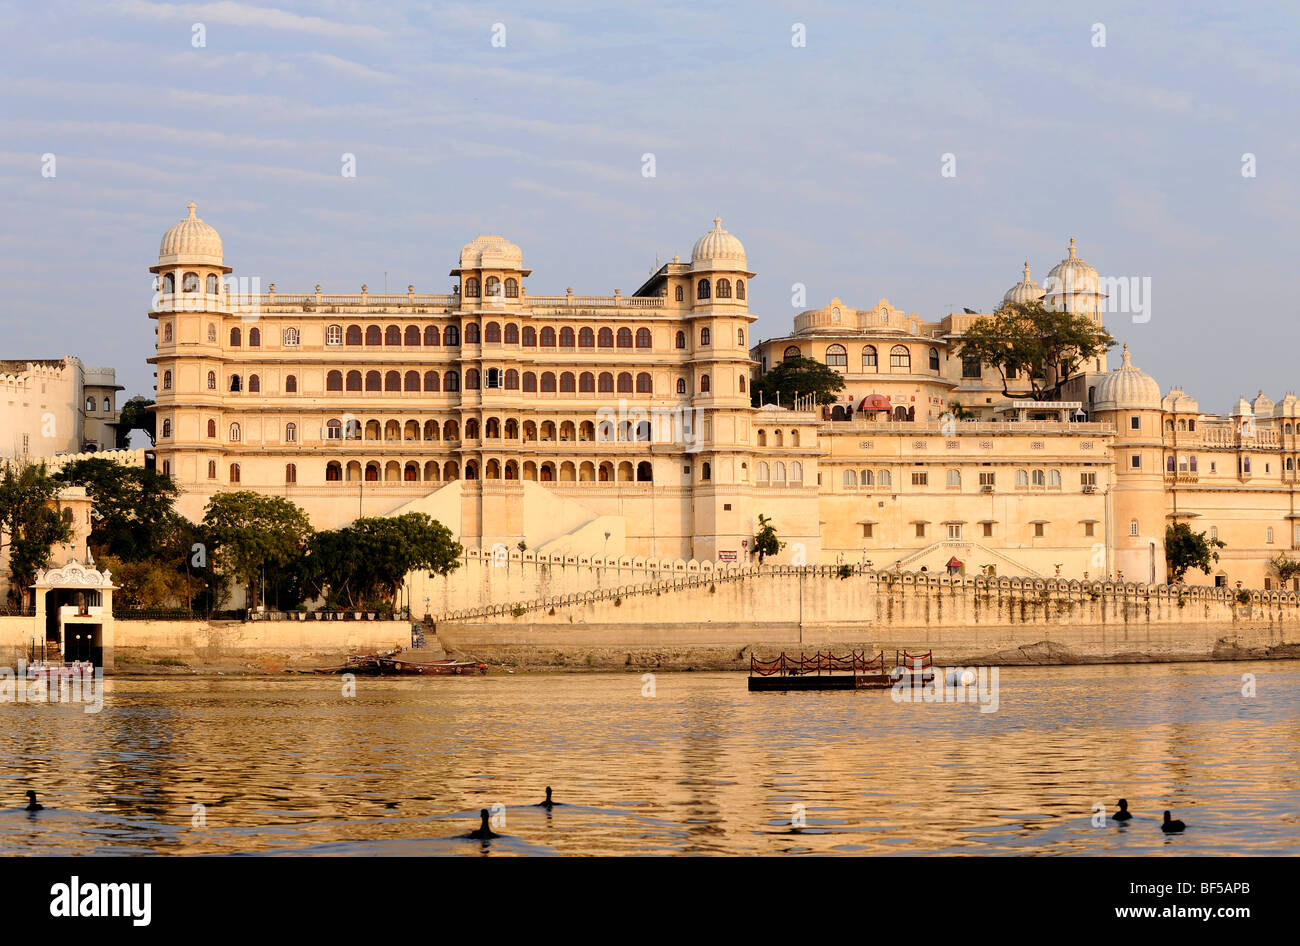 City Palace on Lake Pichola in the evening twilight, Udaipur, Rajasthan, North India, India, South Asia, Asia Stock Photo